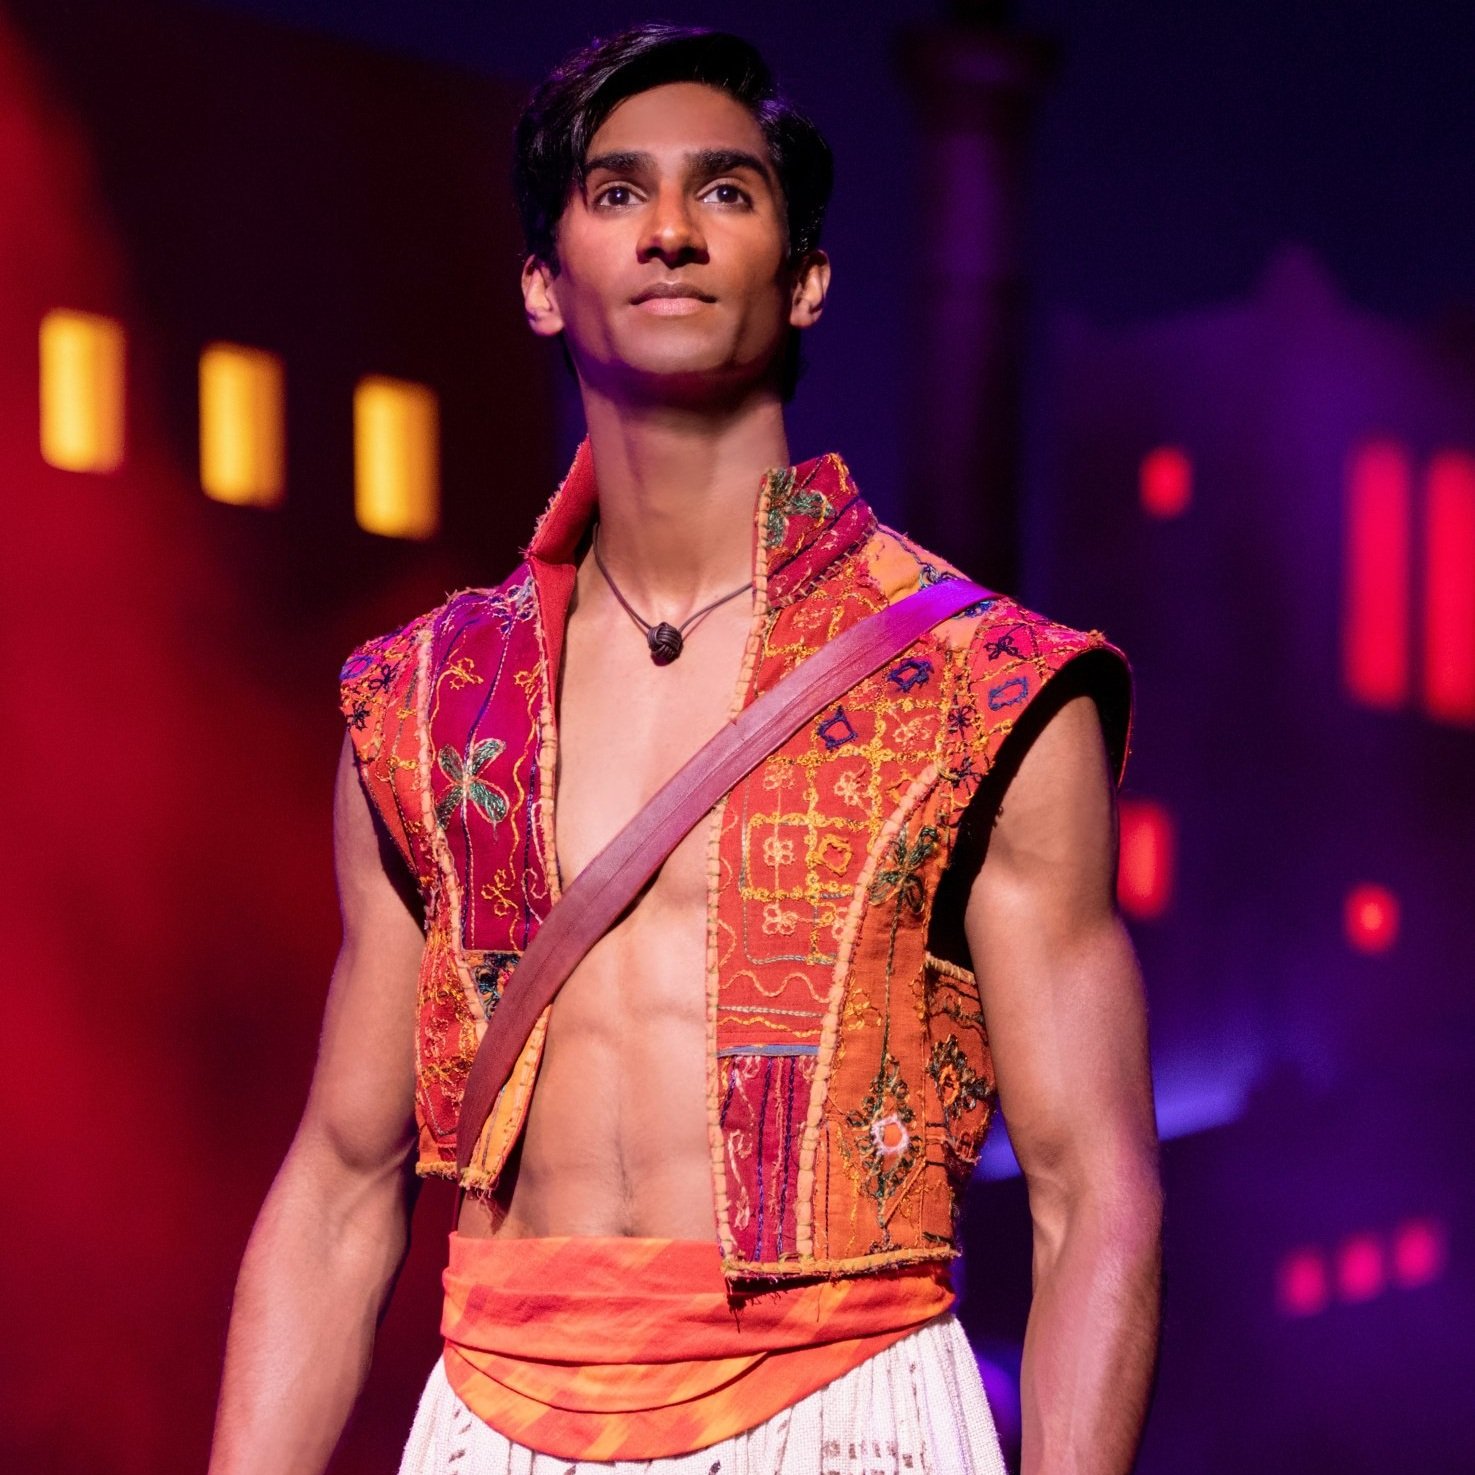  Student  Michael Maliakel  was thrilled to make his B’way debut in the title role of ALADDIN and re-open the show following the COVID shutdown 